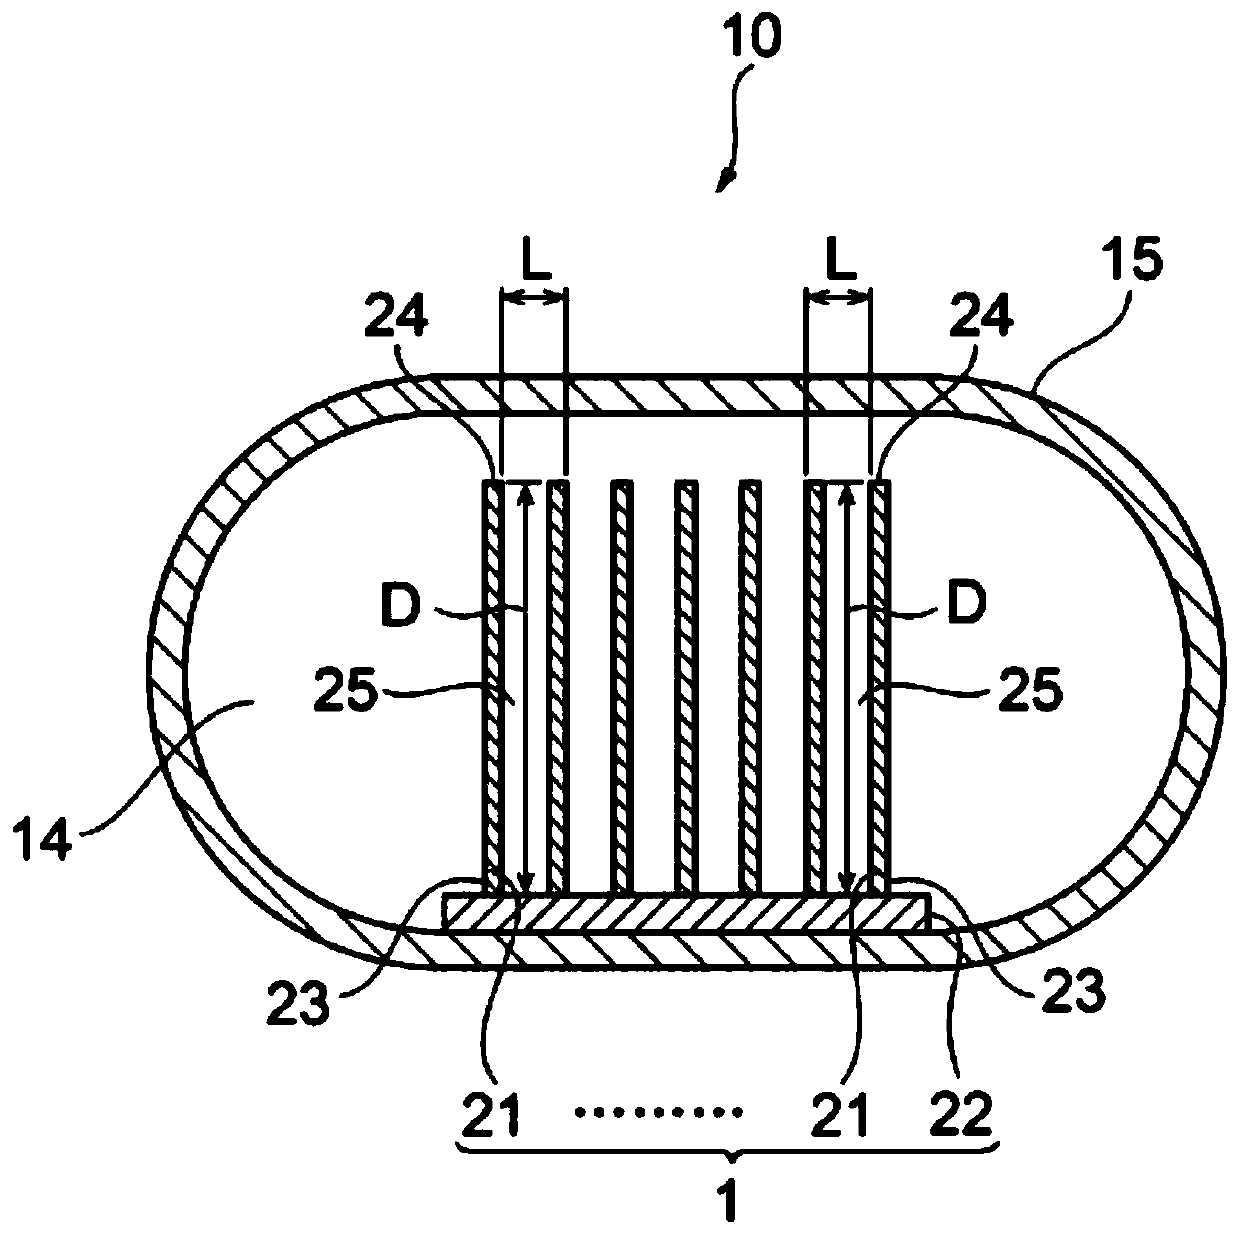 Wick structure and heat pipe accommodating wick structure